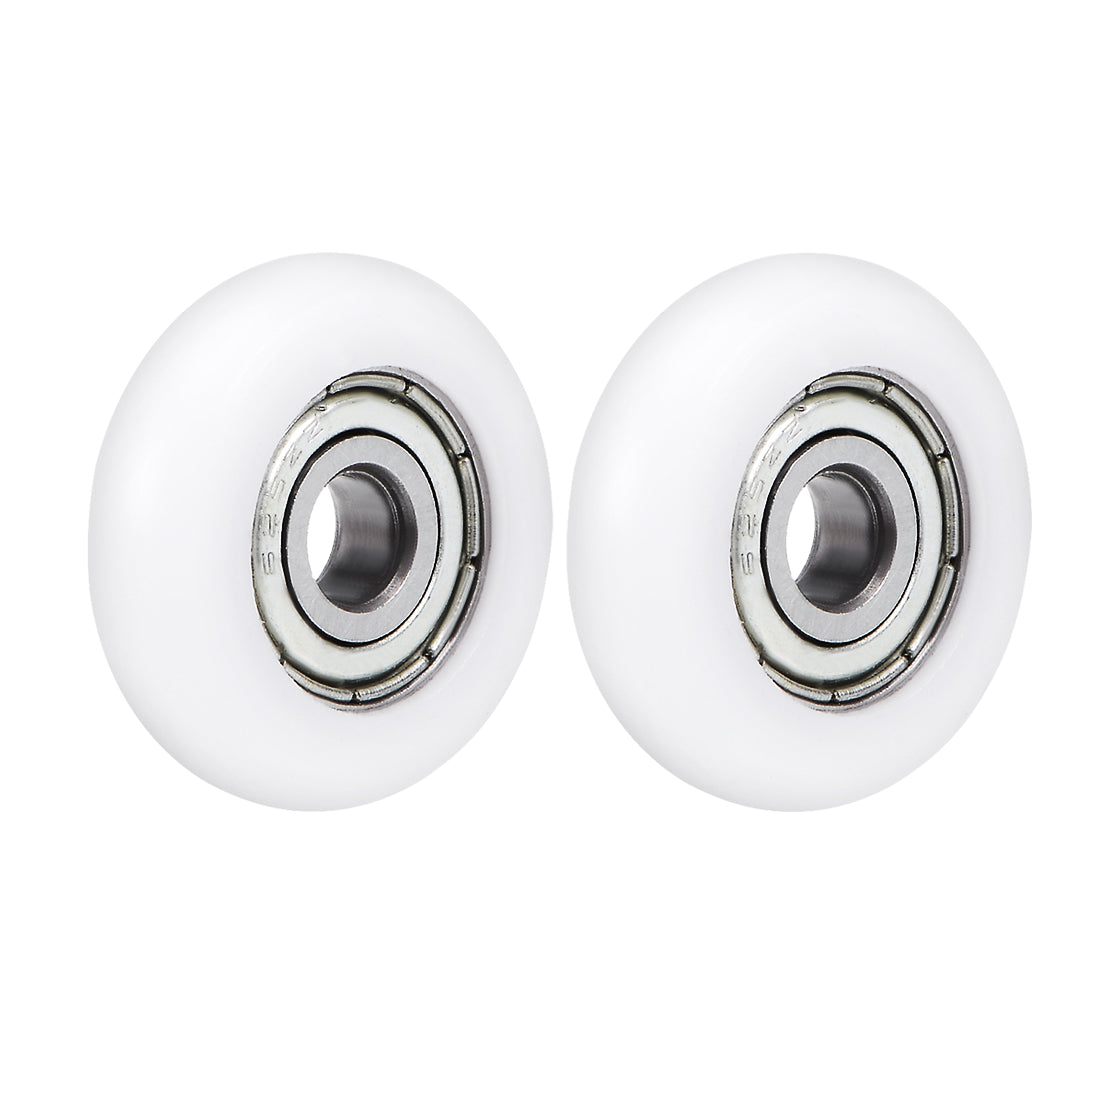 uxcell Uxcell 625ZZ Plastic Coated Ball Bearing 5x23x7mm for Door Windows Furniture Pulley 2pcs